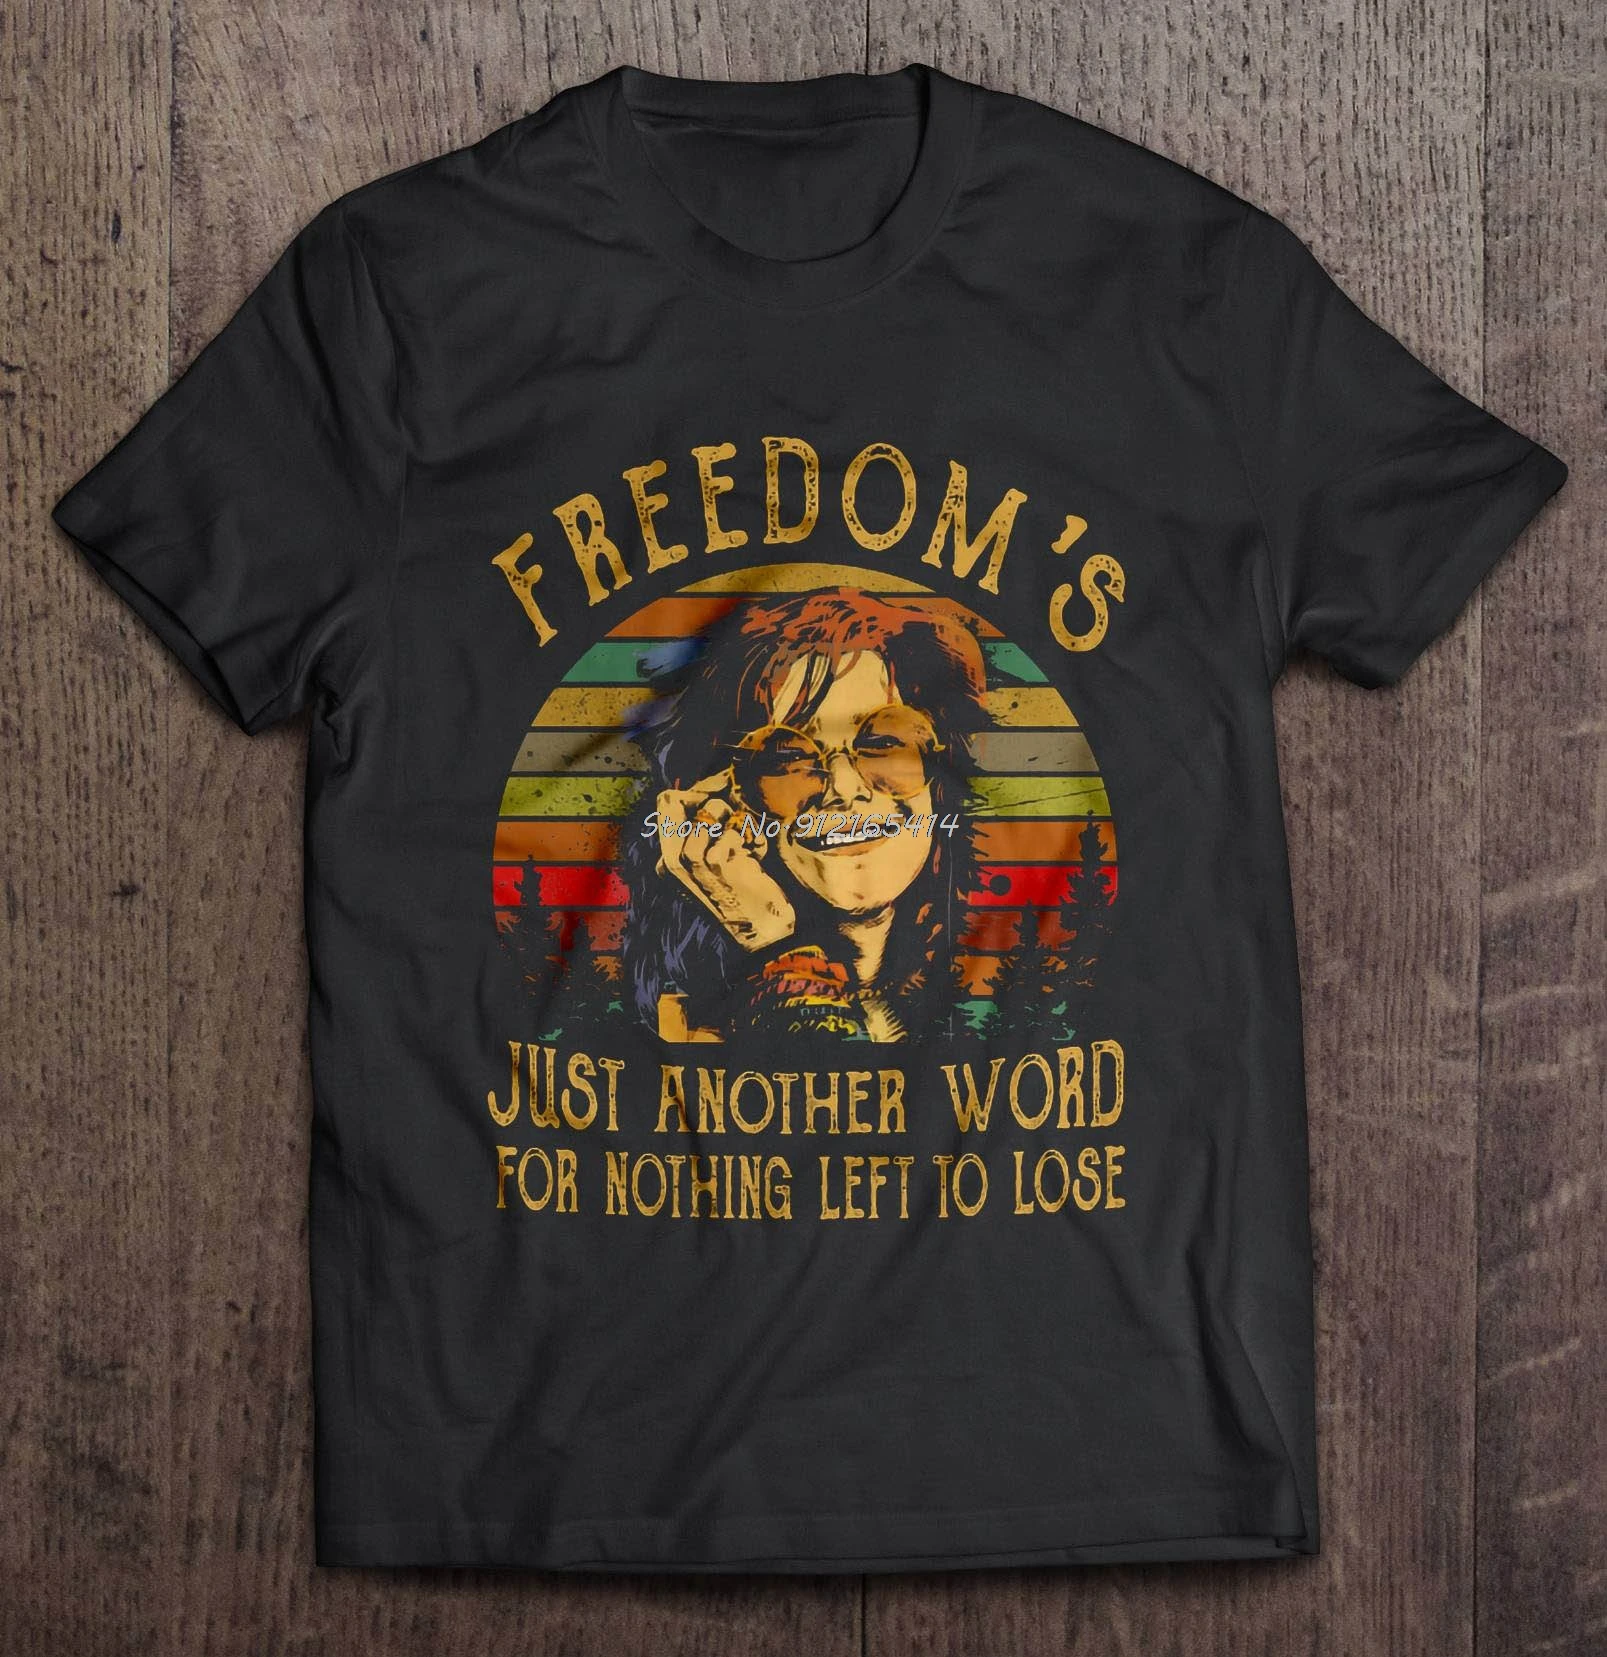 Men Funny T Shirt Fashion Tshirt Freedom's Just Another Word For Nothing Left To Lose Janis Joplin Vintage Version Women t-shirt